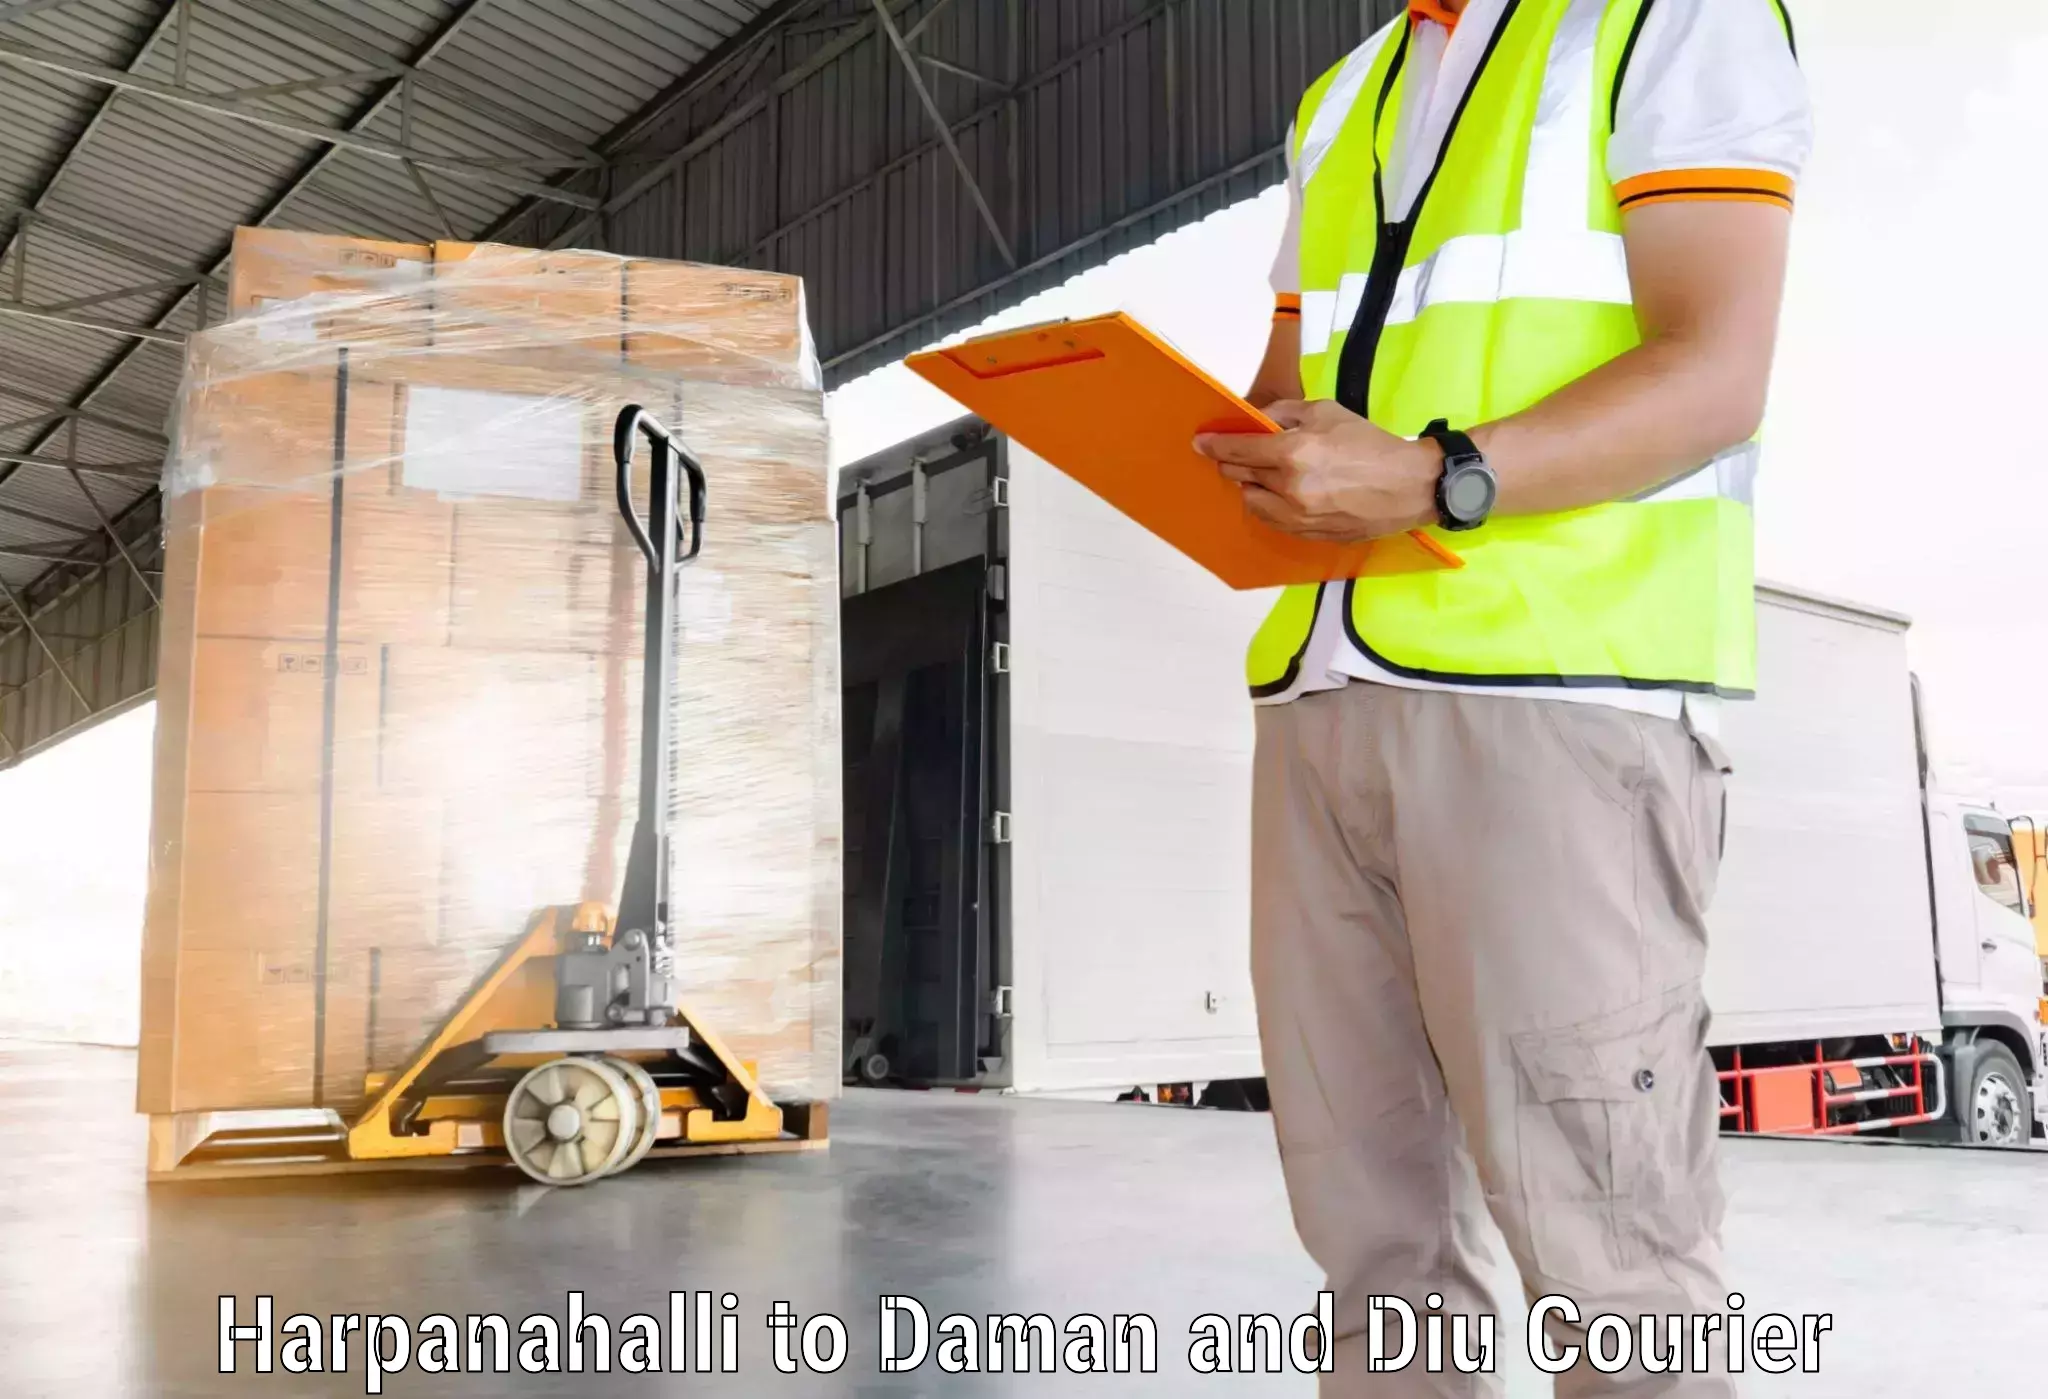 Business delivery service Harpanahalli to Daman and Diu